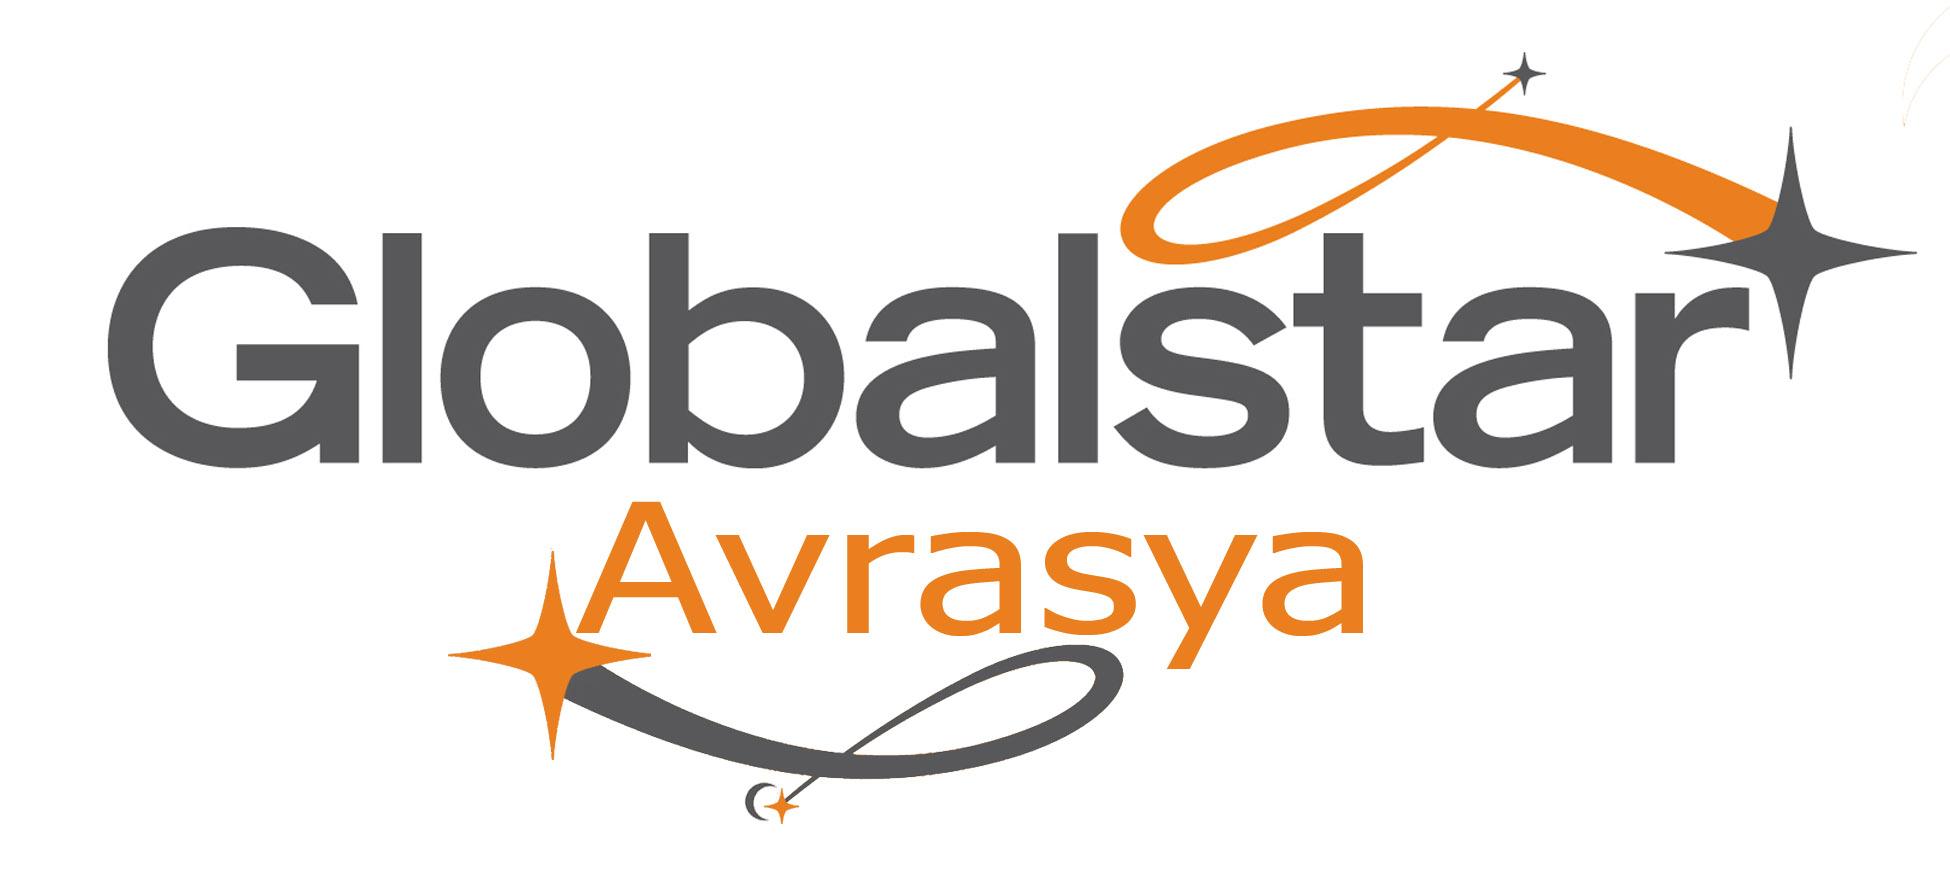 Globalstar Logo - Globalstar Europe satellite services signs agreement with TS2 ...